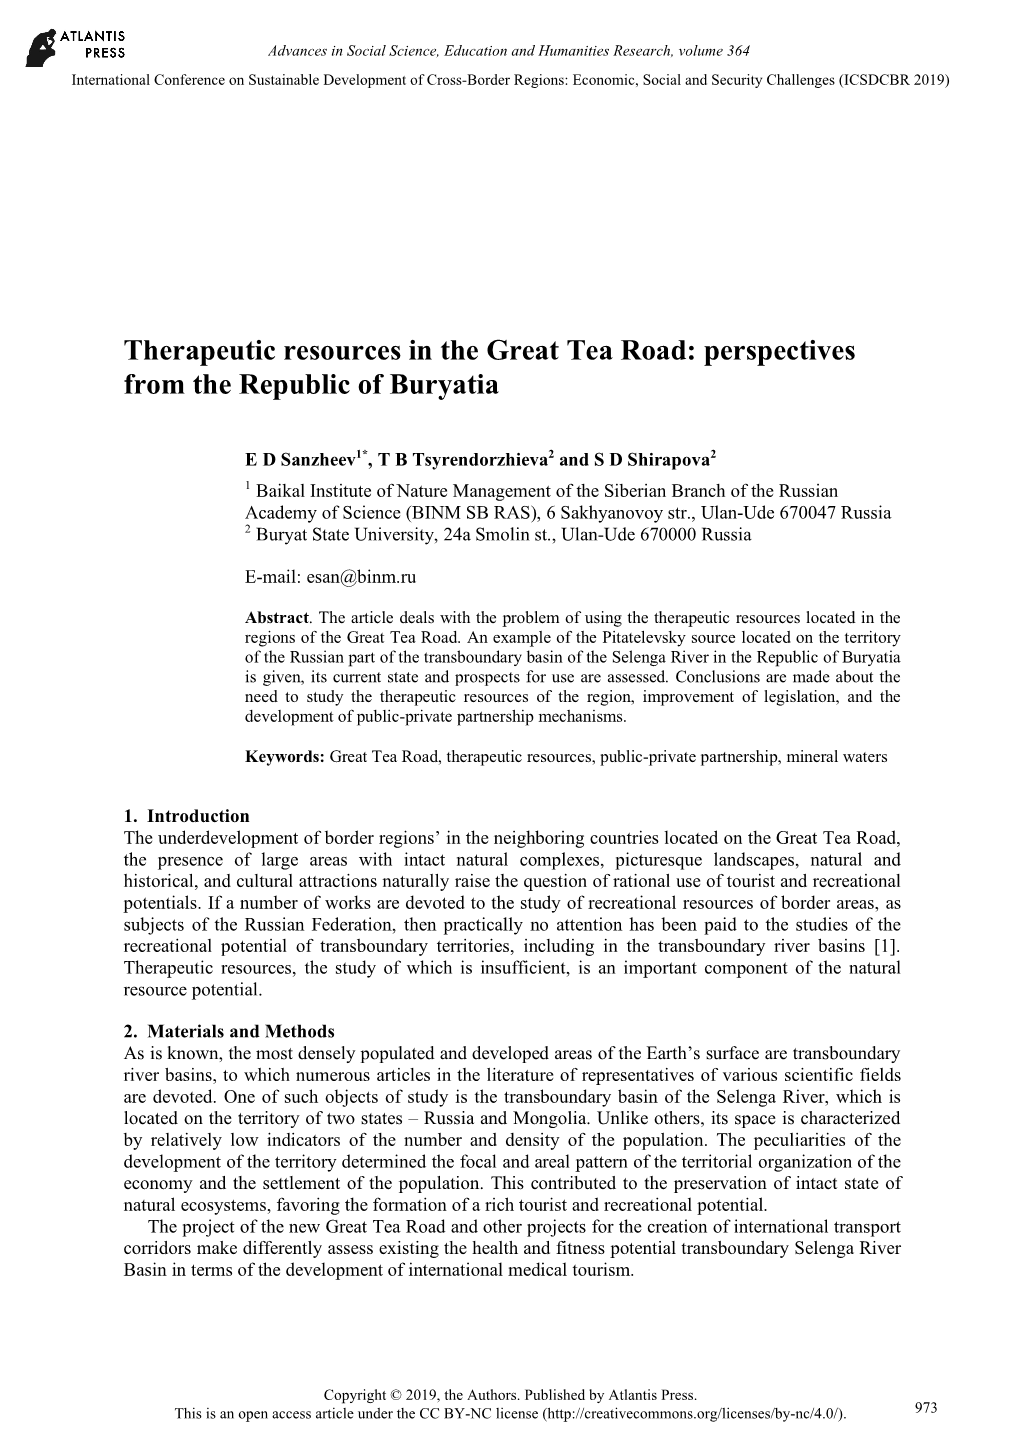 Therapeutic Resources in the Great Tea Road: Perspectives from the Republic of Buryatia